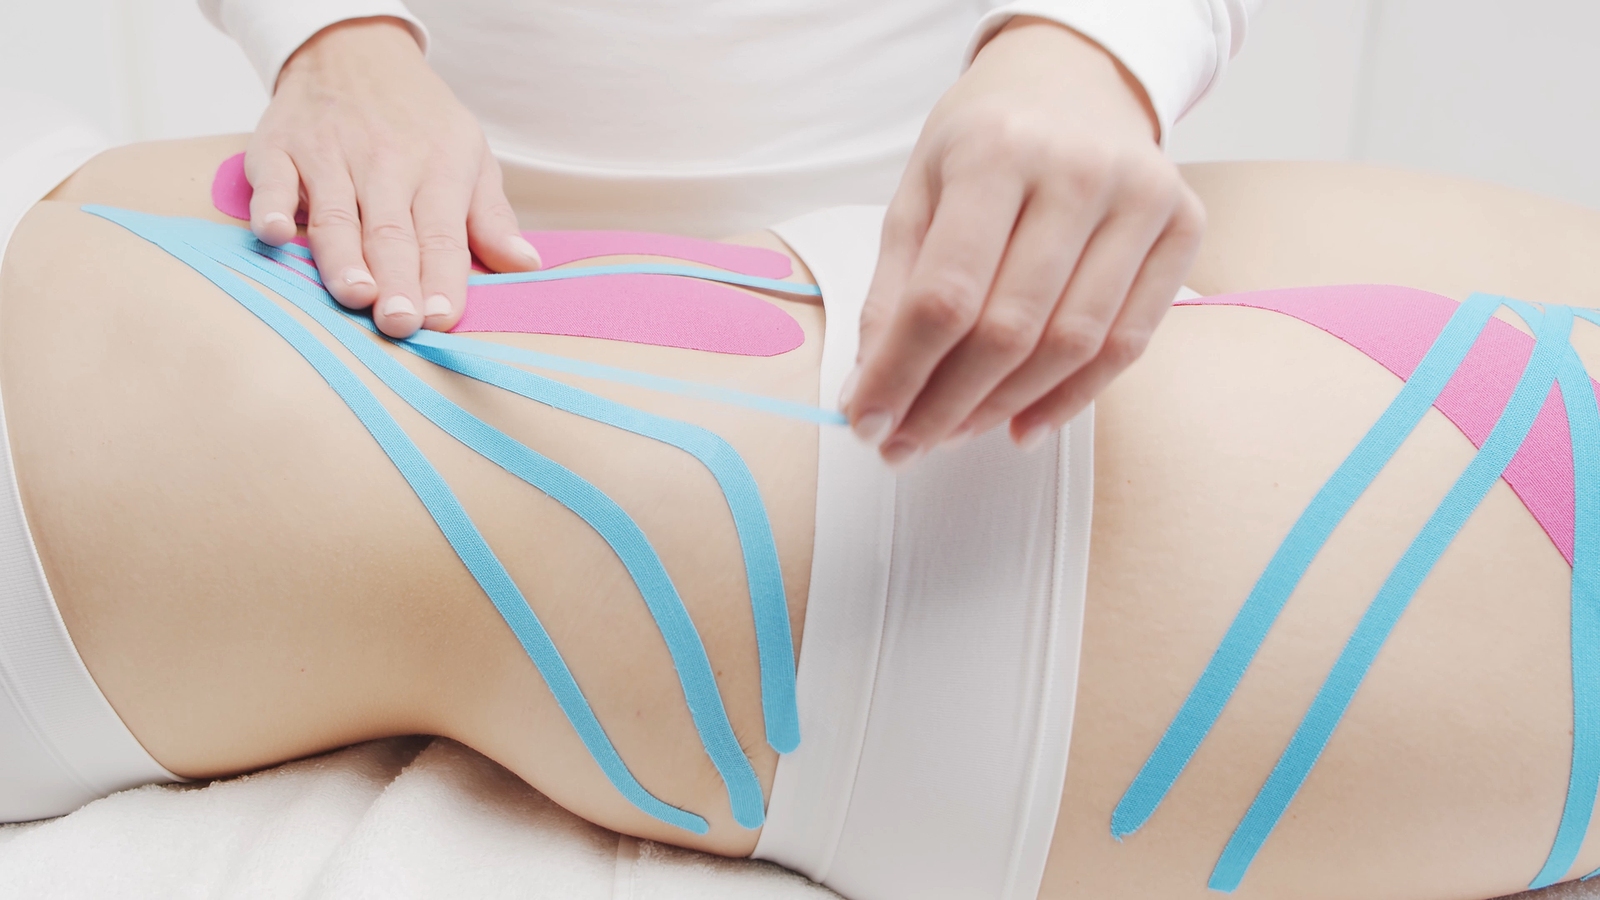 Therapist Is Applying Tape To Female Body. Physiotherapy, Kinesi